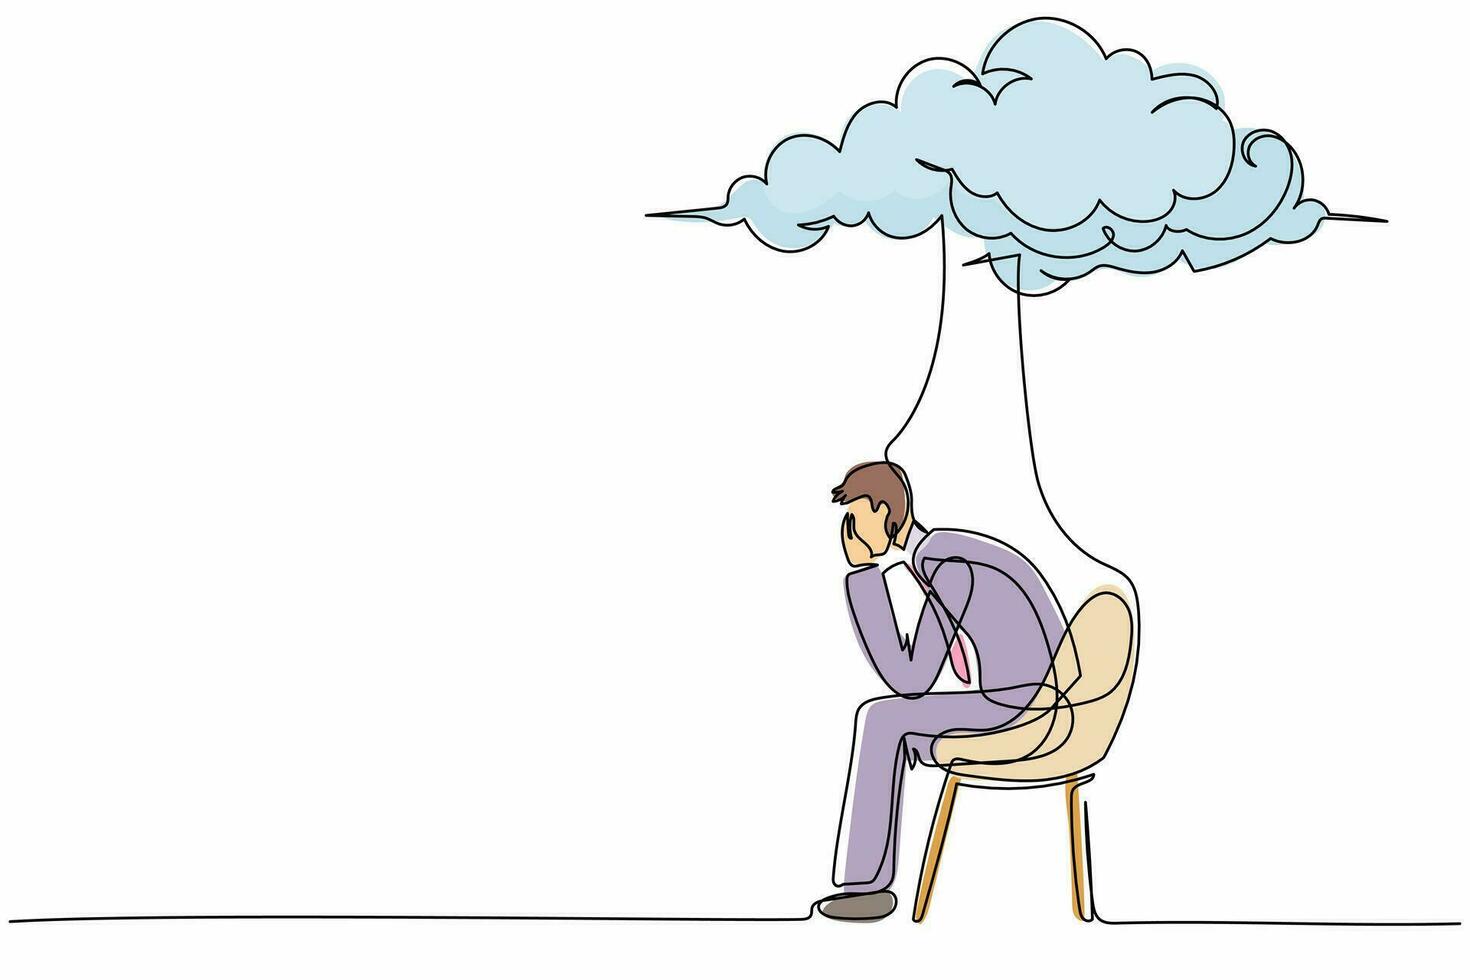 Continuous one line drawing worried businessman sitting on chair under rain cloud. Concept of business failure, collapse economy, economic crisis. Single line draw design vector graphic illustration